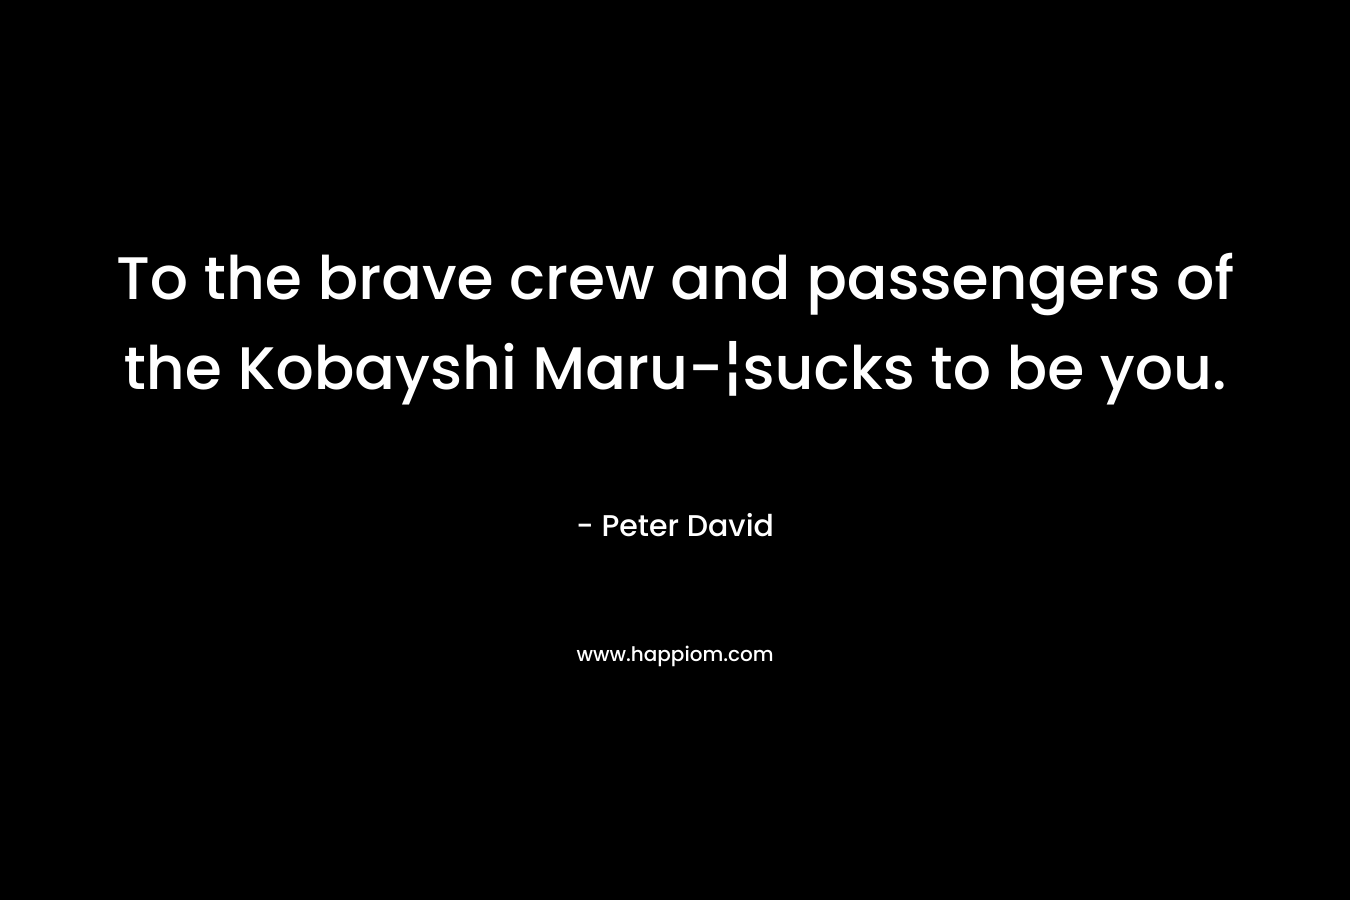 To the brave crew and passengers of the Kobayshi Maru-¦sucks to be you.